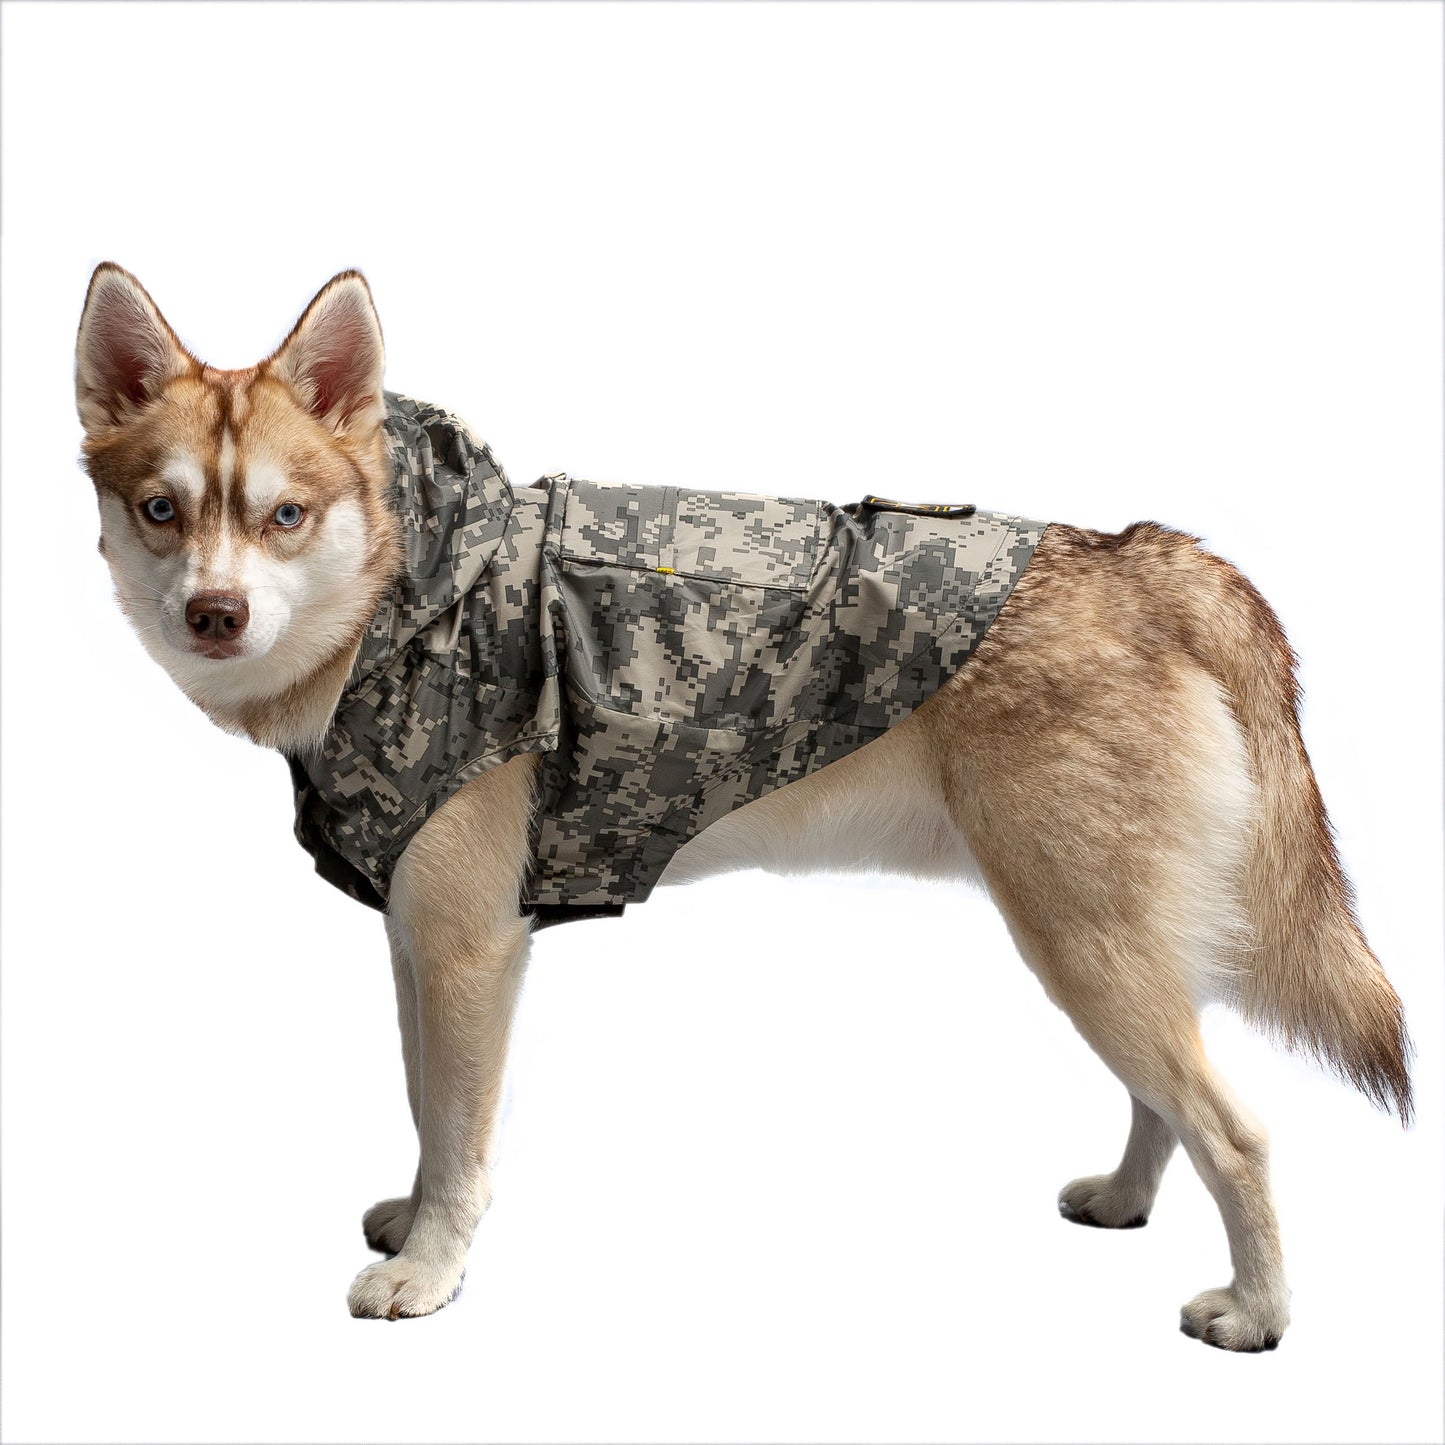 US Army Packable Dog Raincoat - Camo